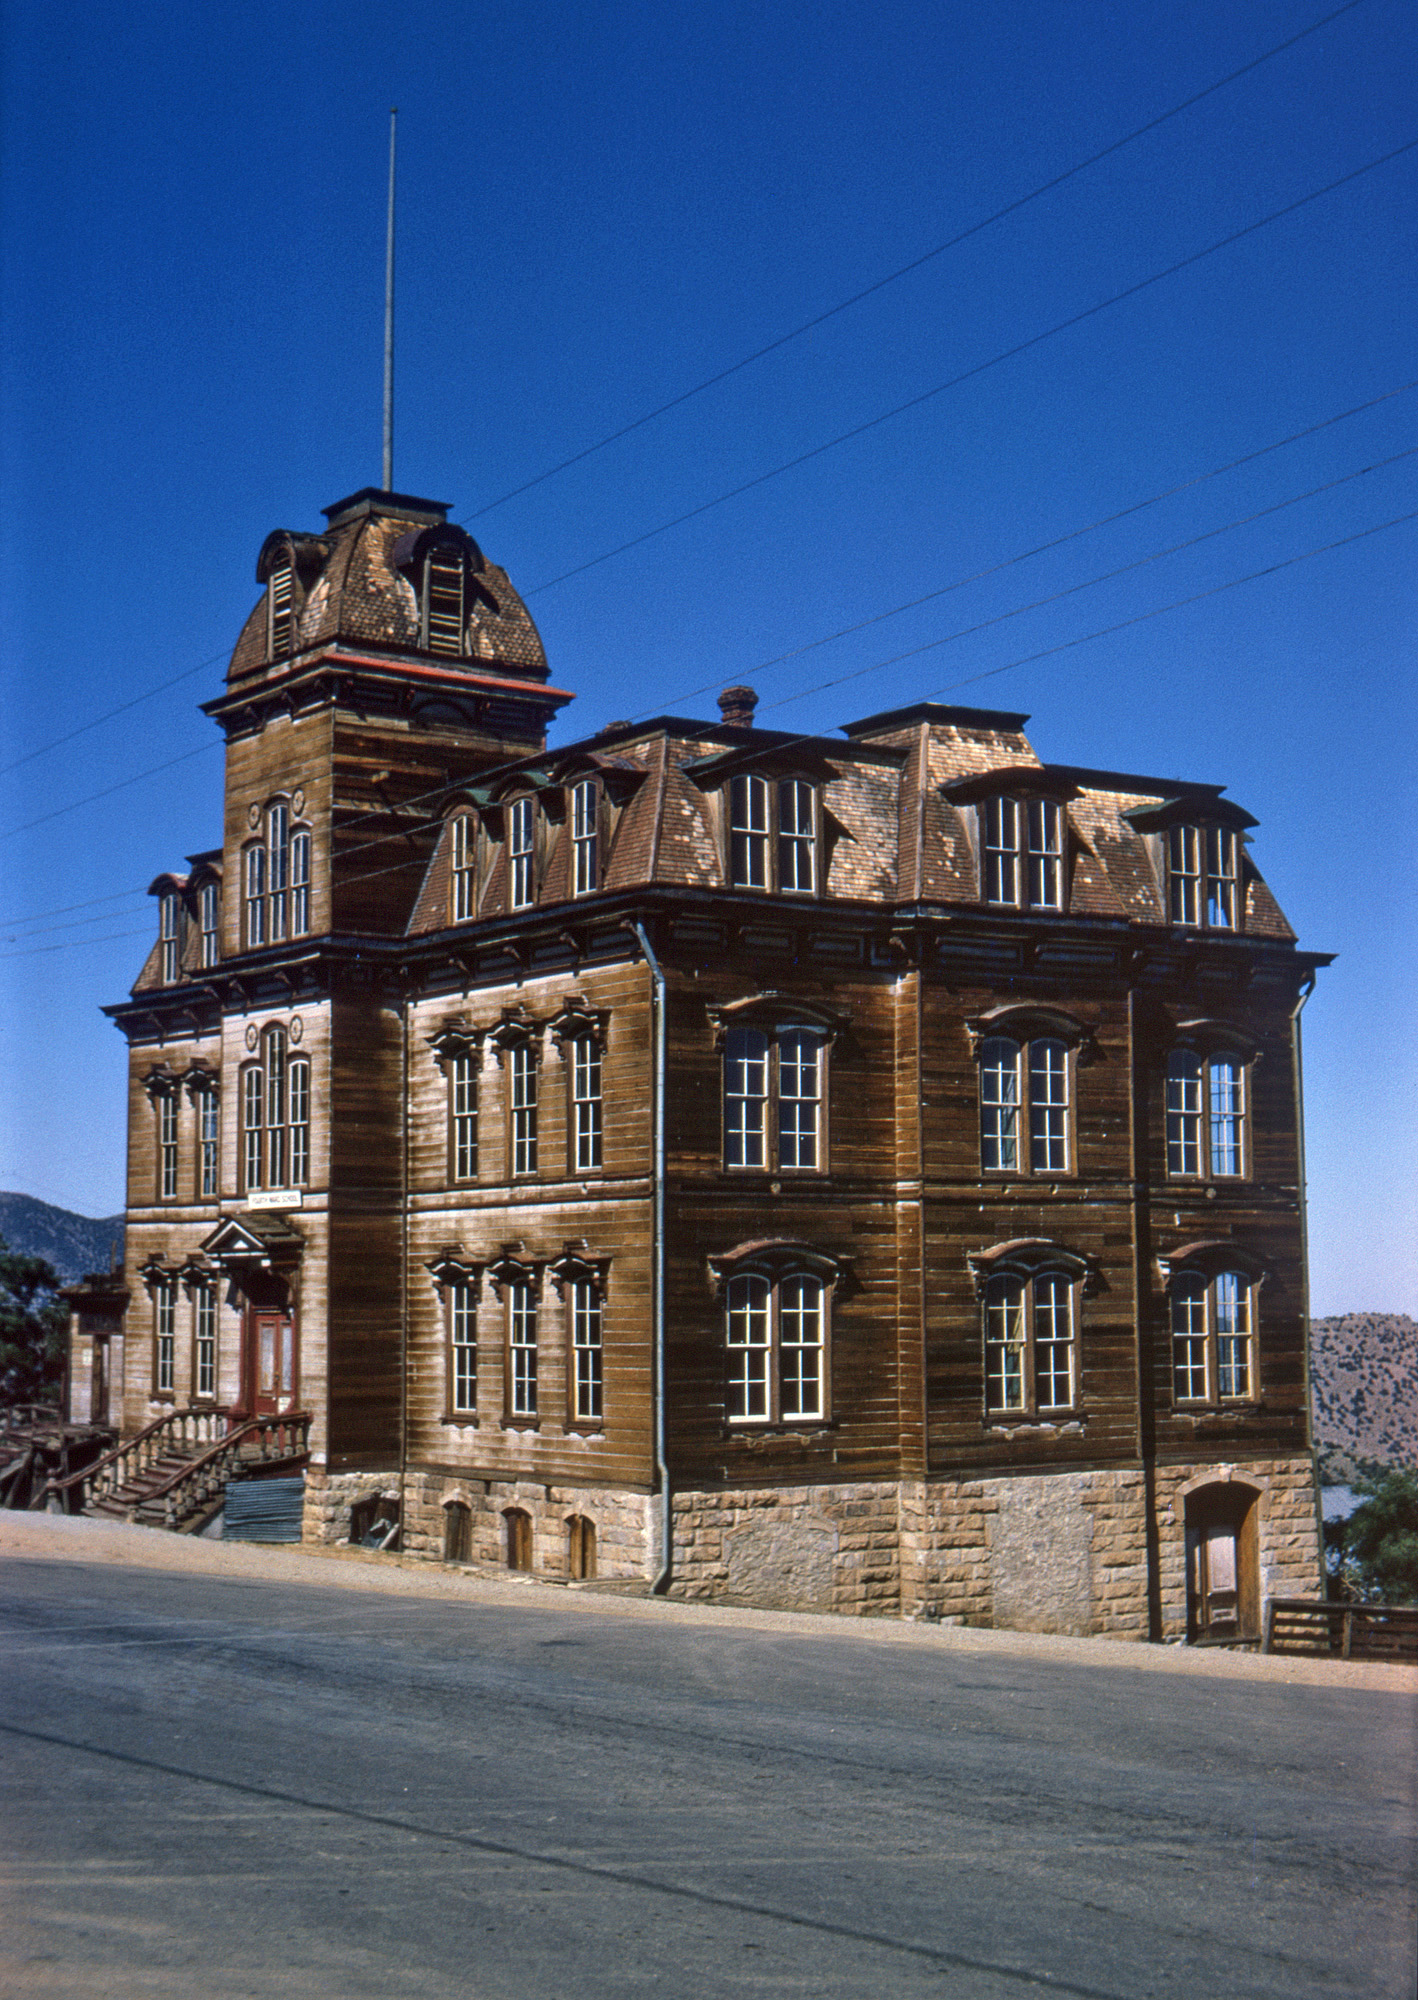 When I took this Kodachrome slide of Virginia City's Fourth Ward School building in August 1965 I had never heard of Arthur Rothstein, much less realized I was following in his footsteps a quarter century after he took this photograph. Other things I didn't know then was that a neighbor in Larkspur had once lived, worked and met Ulysses S. Grant here, or that exactly one year later I'd be back with my family and our new Rambler. View full size.